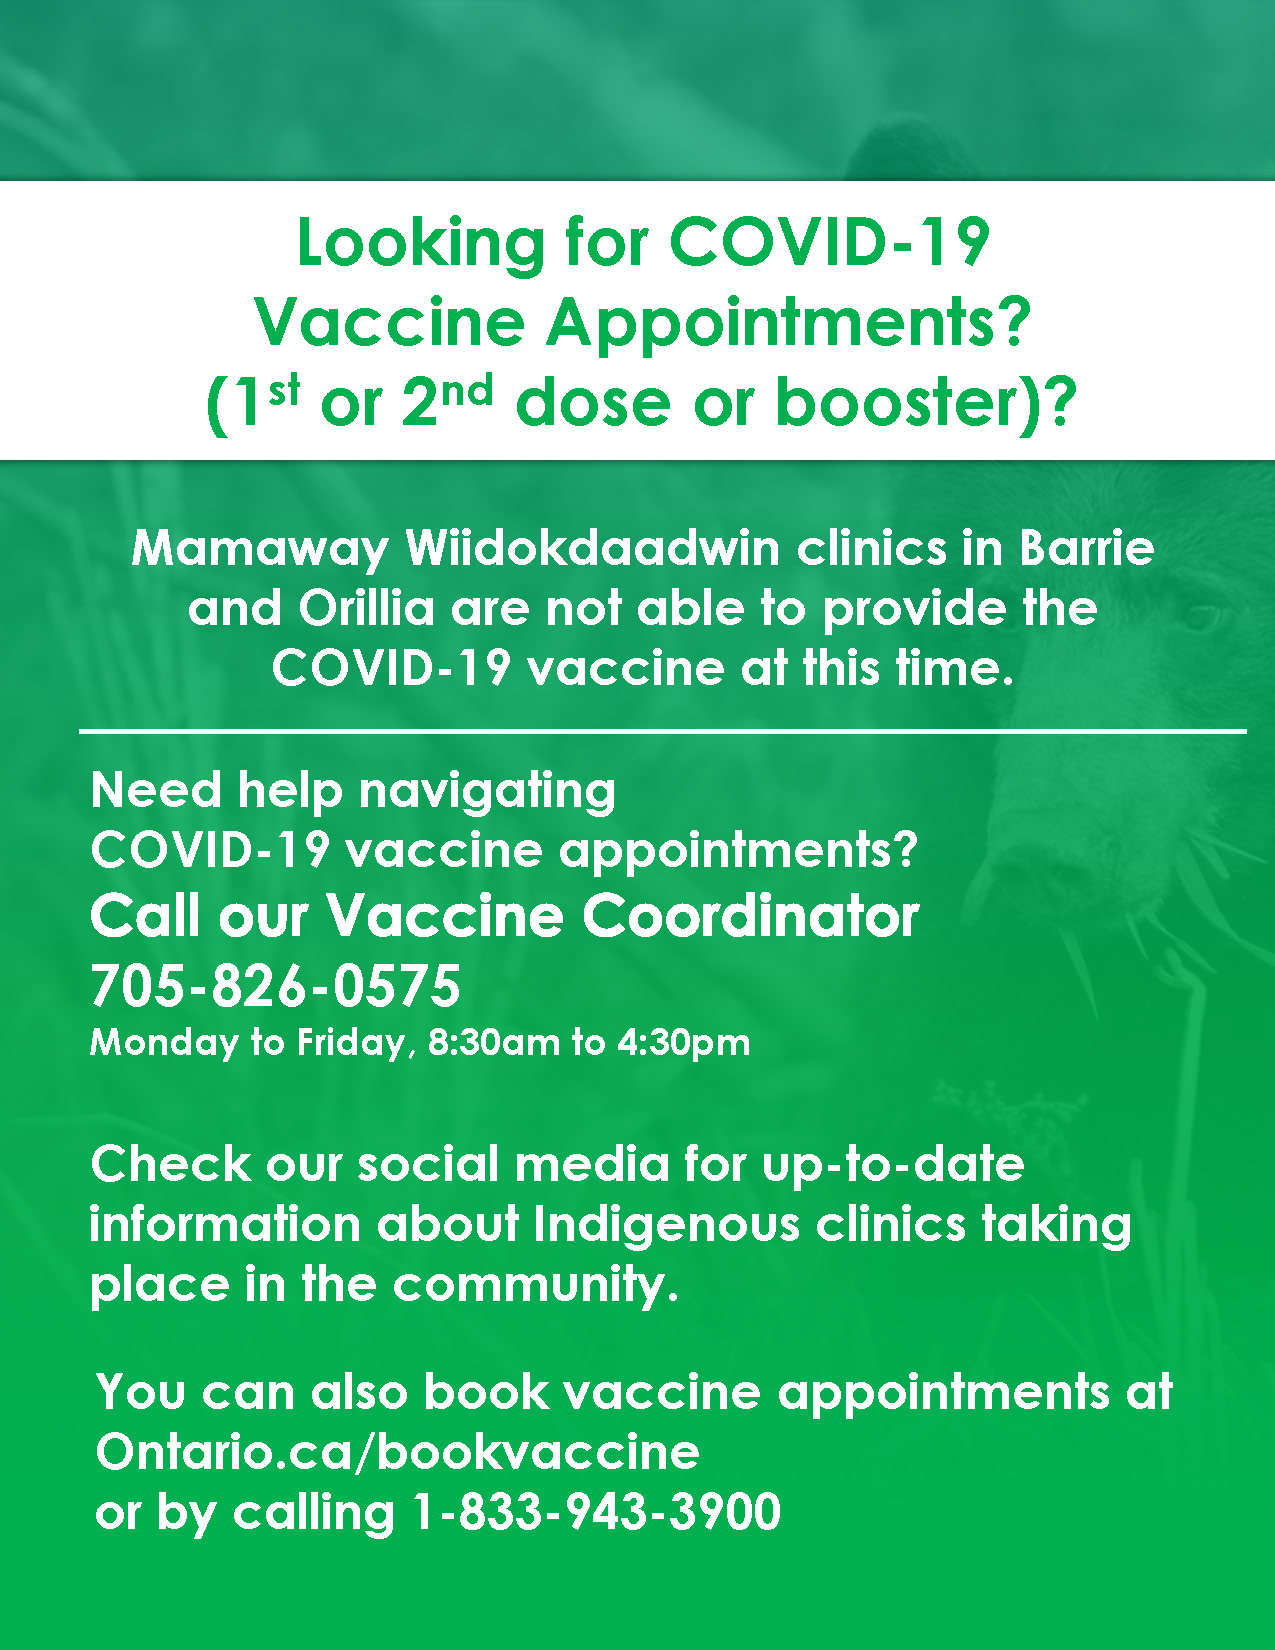 Mamaway is not providing COVID vaccine appointments at this time